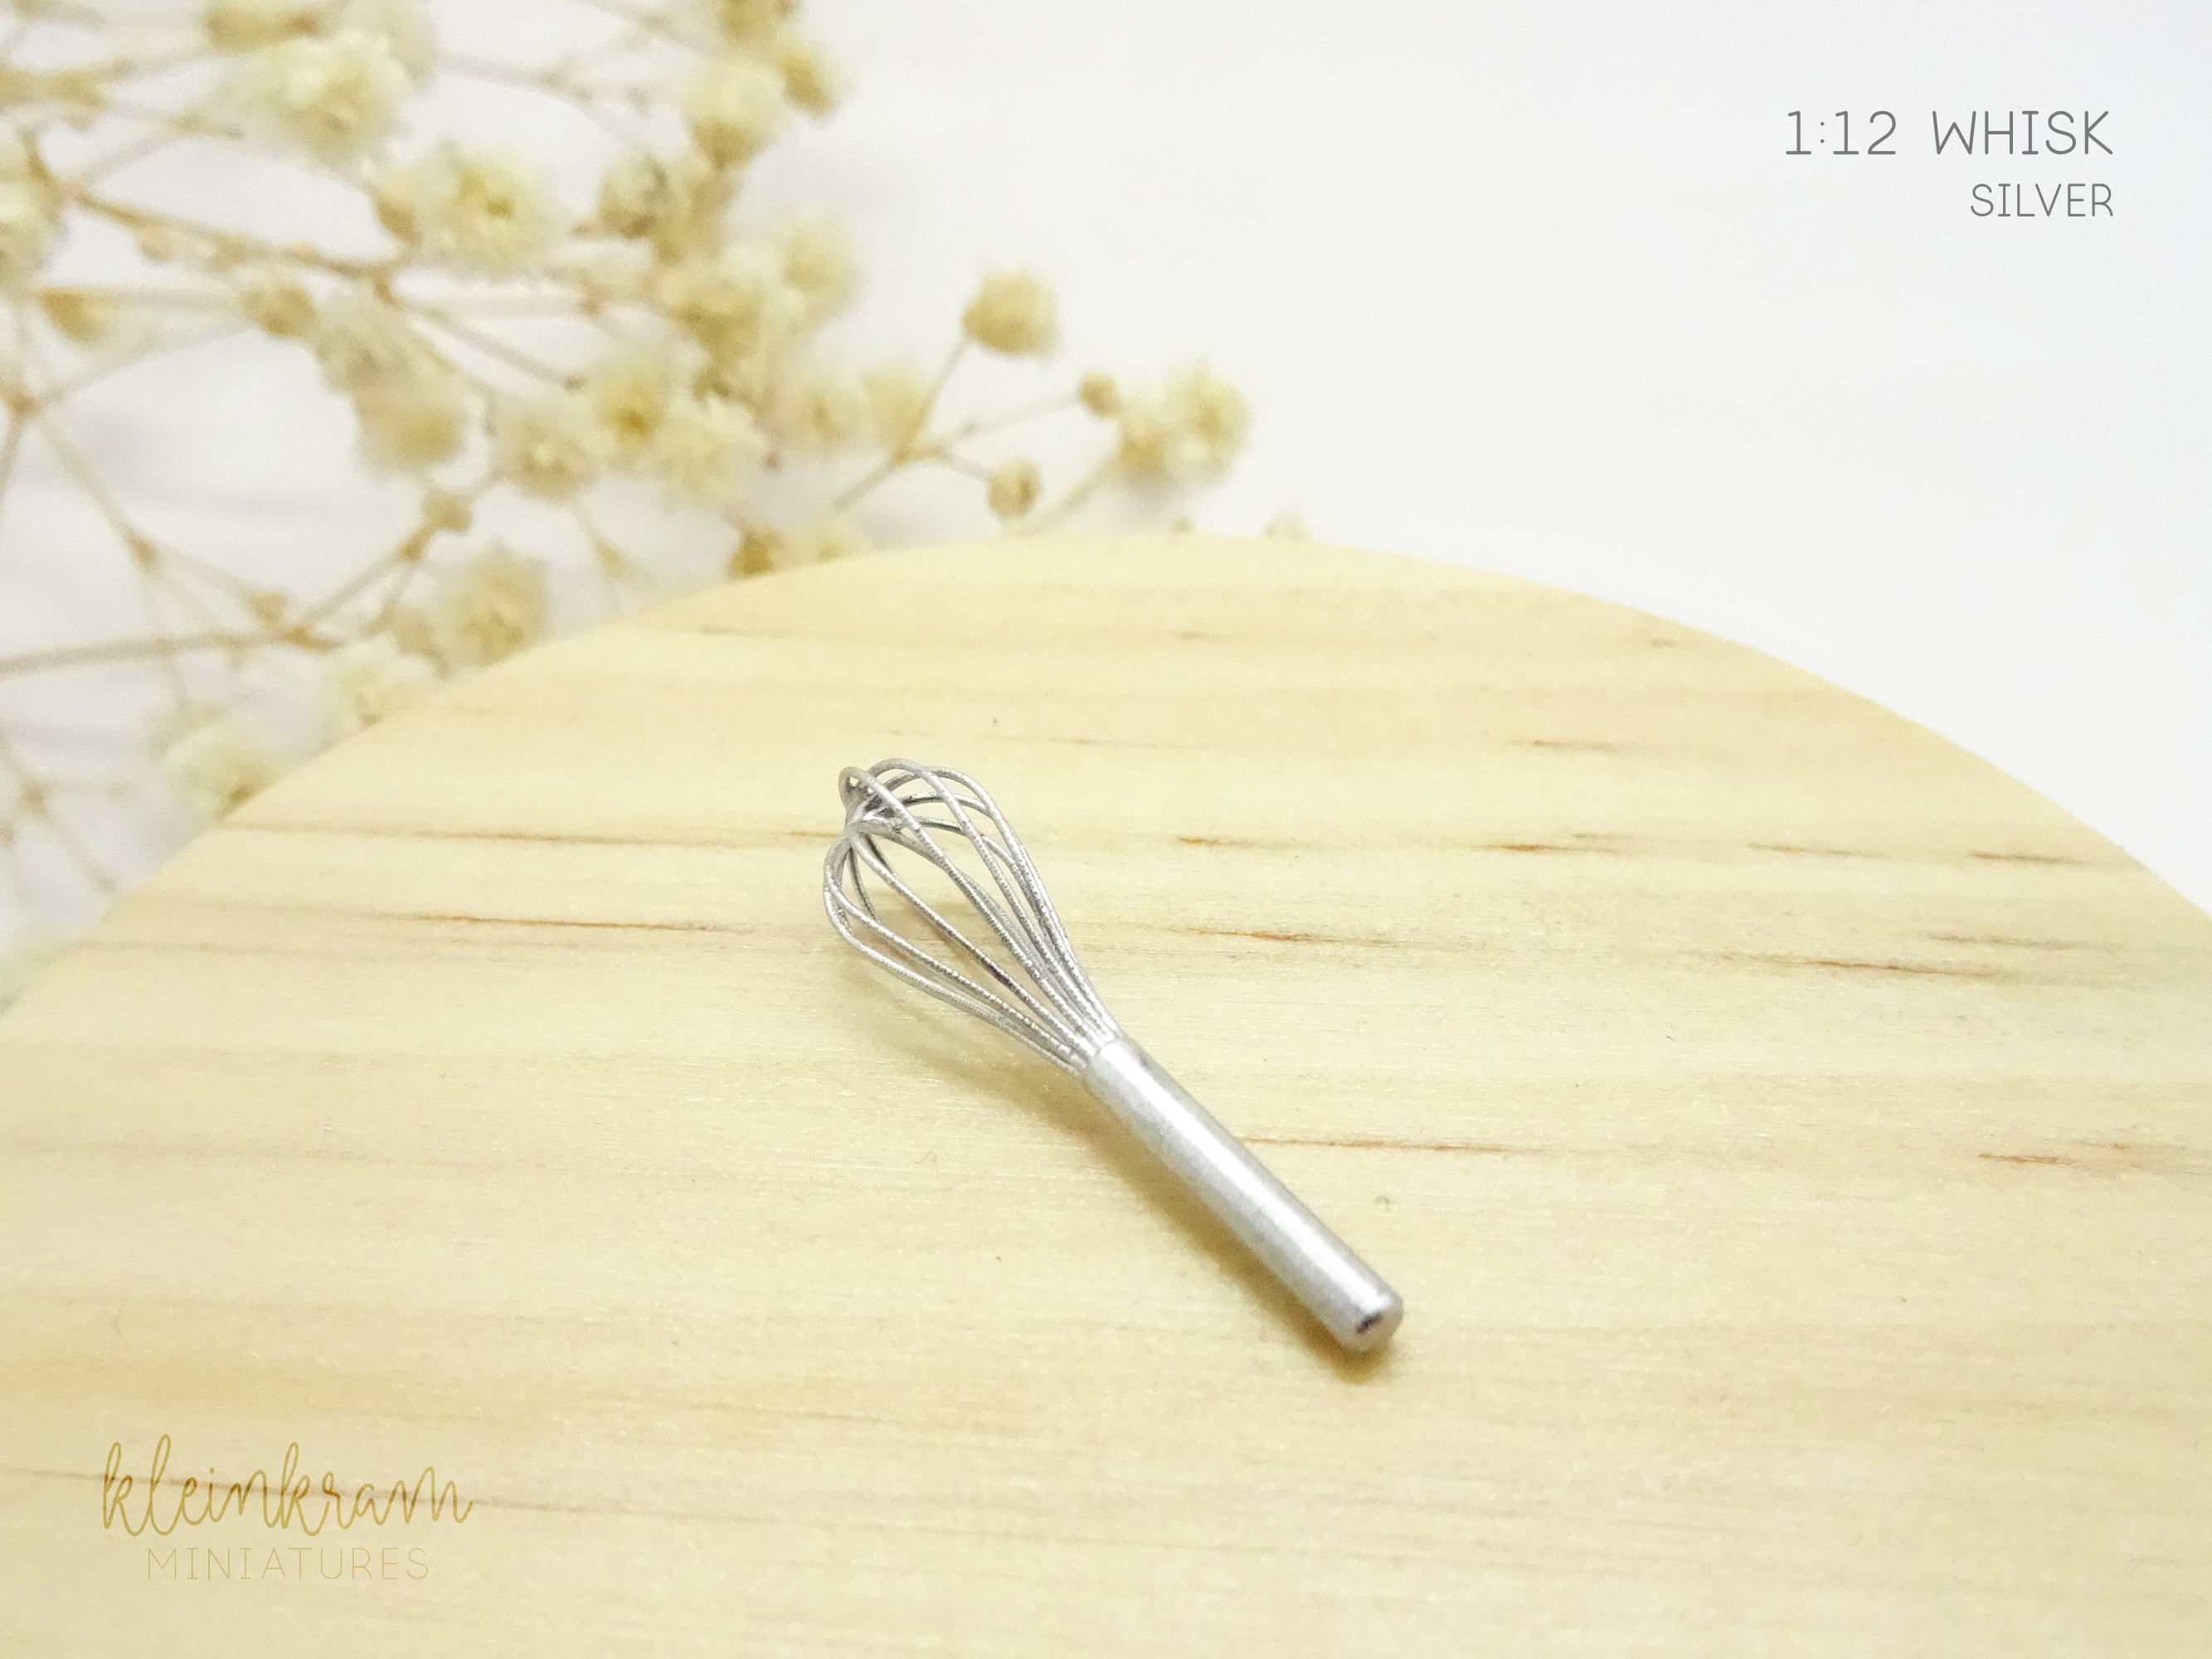 Whisk - 1:12 Miniature